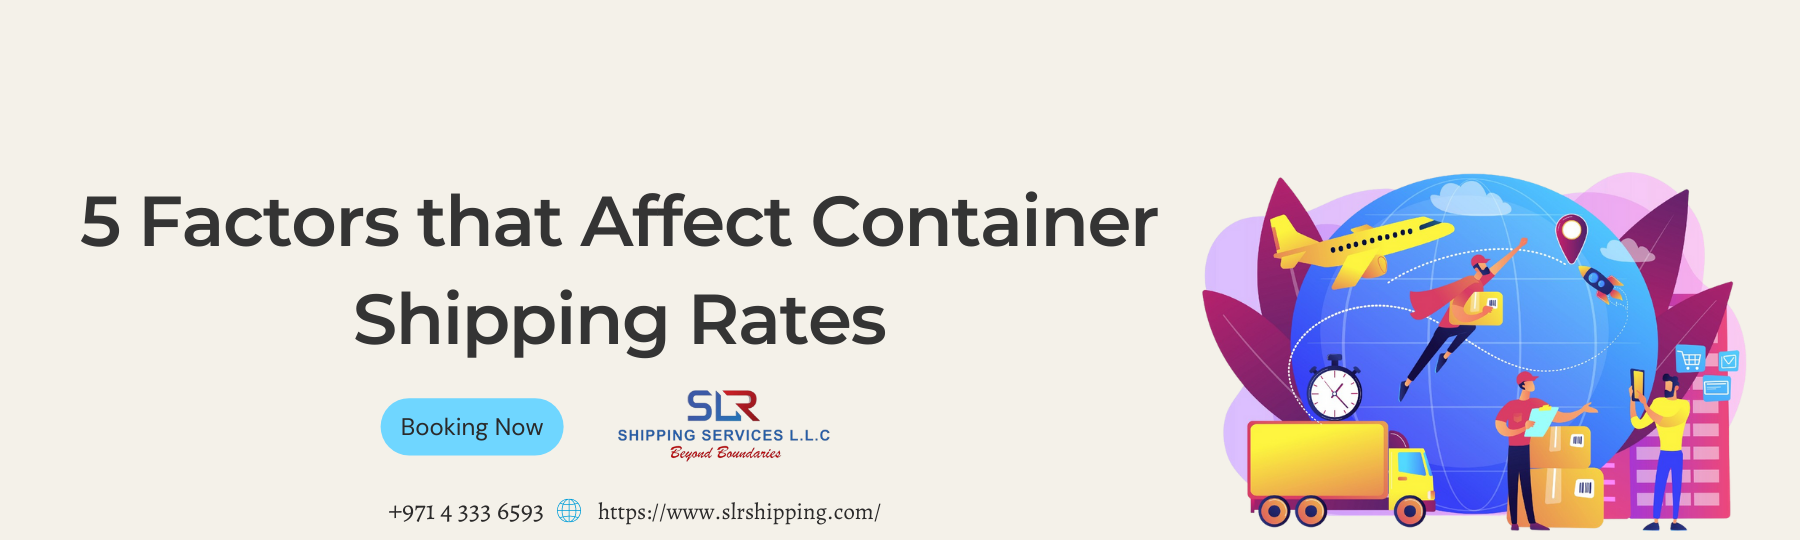 Top 5 Factors Increasing Container Shipping Rates